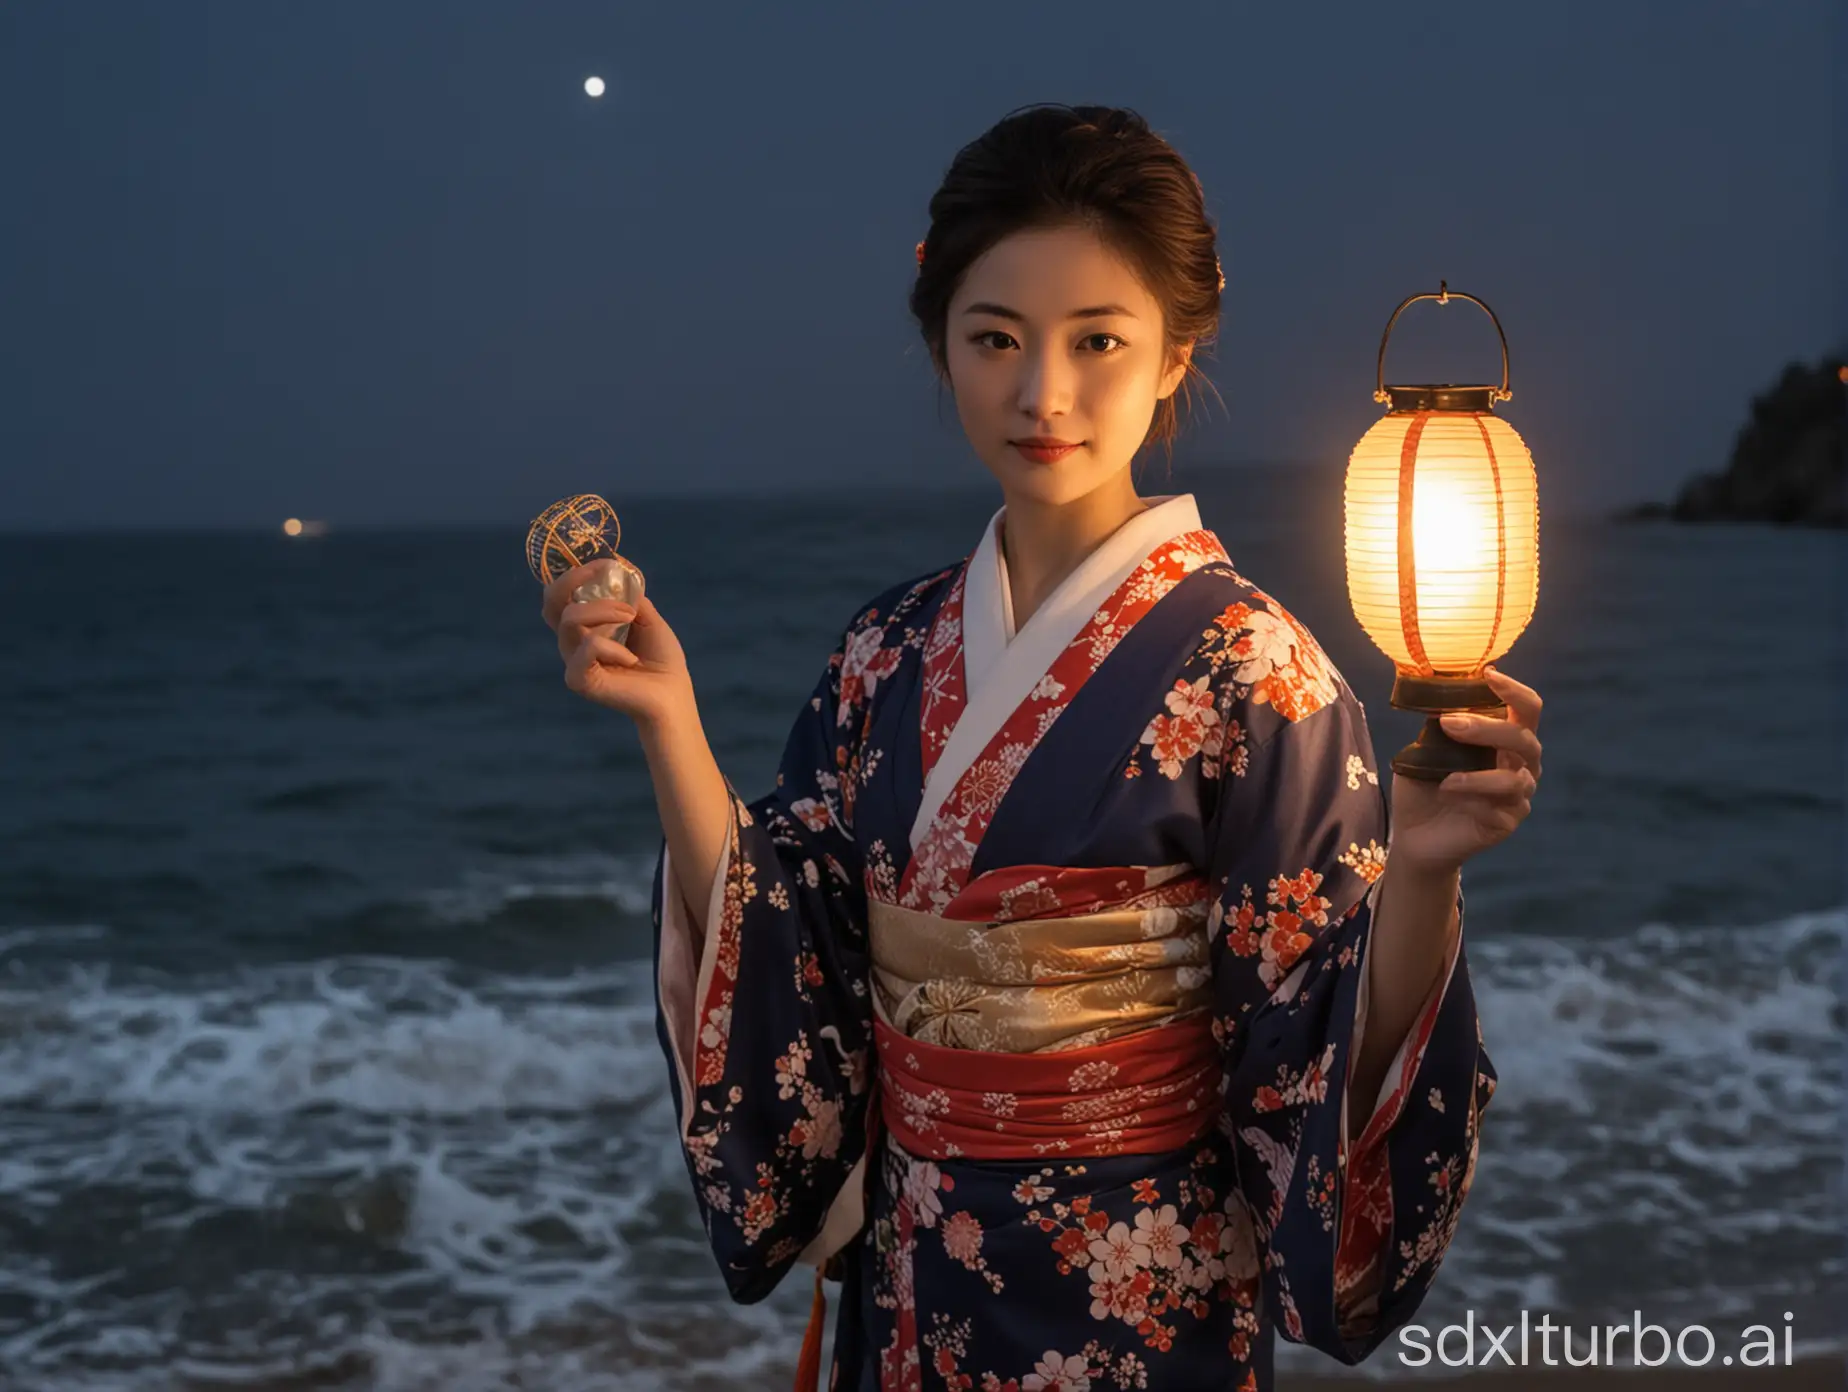 wearing a kimono woman holding a lamp at night by the sea